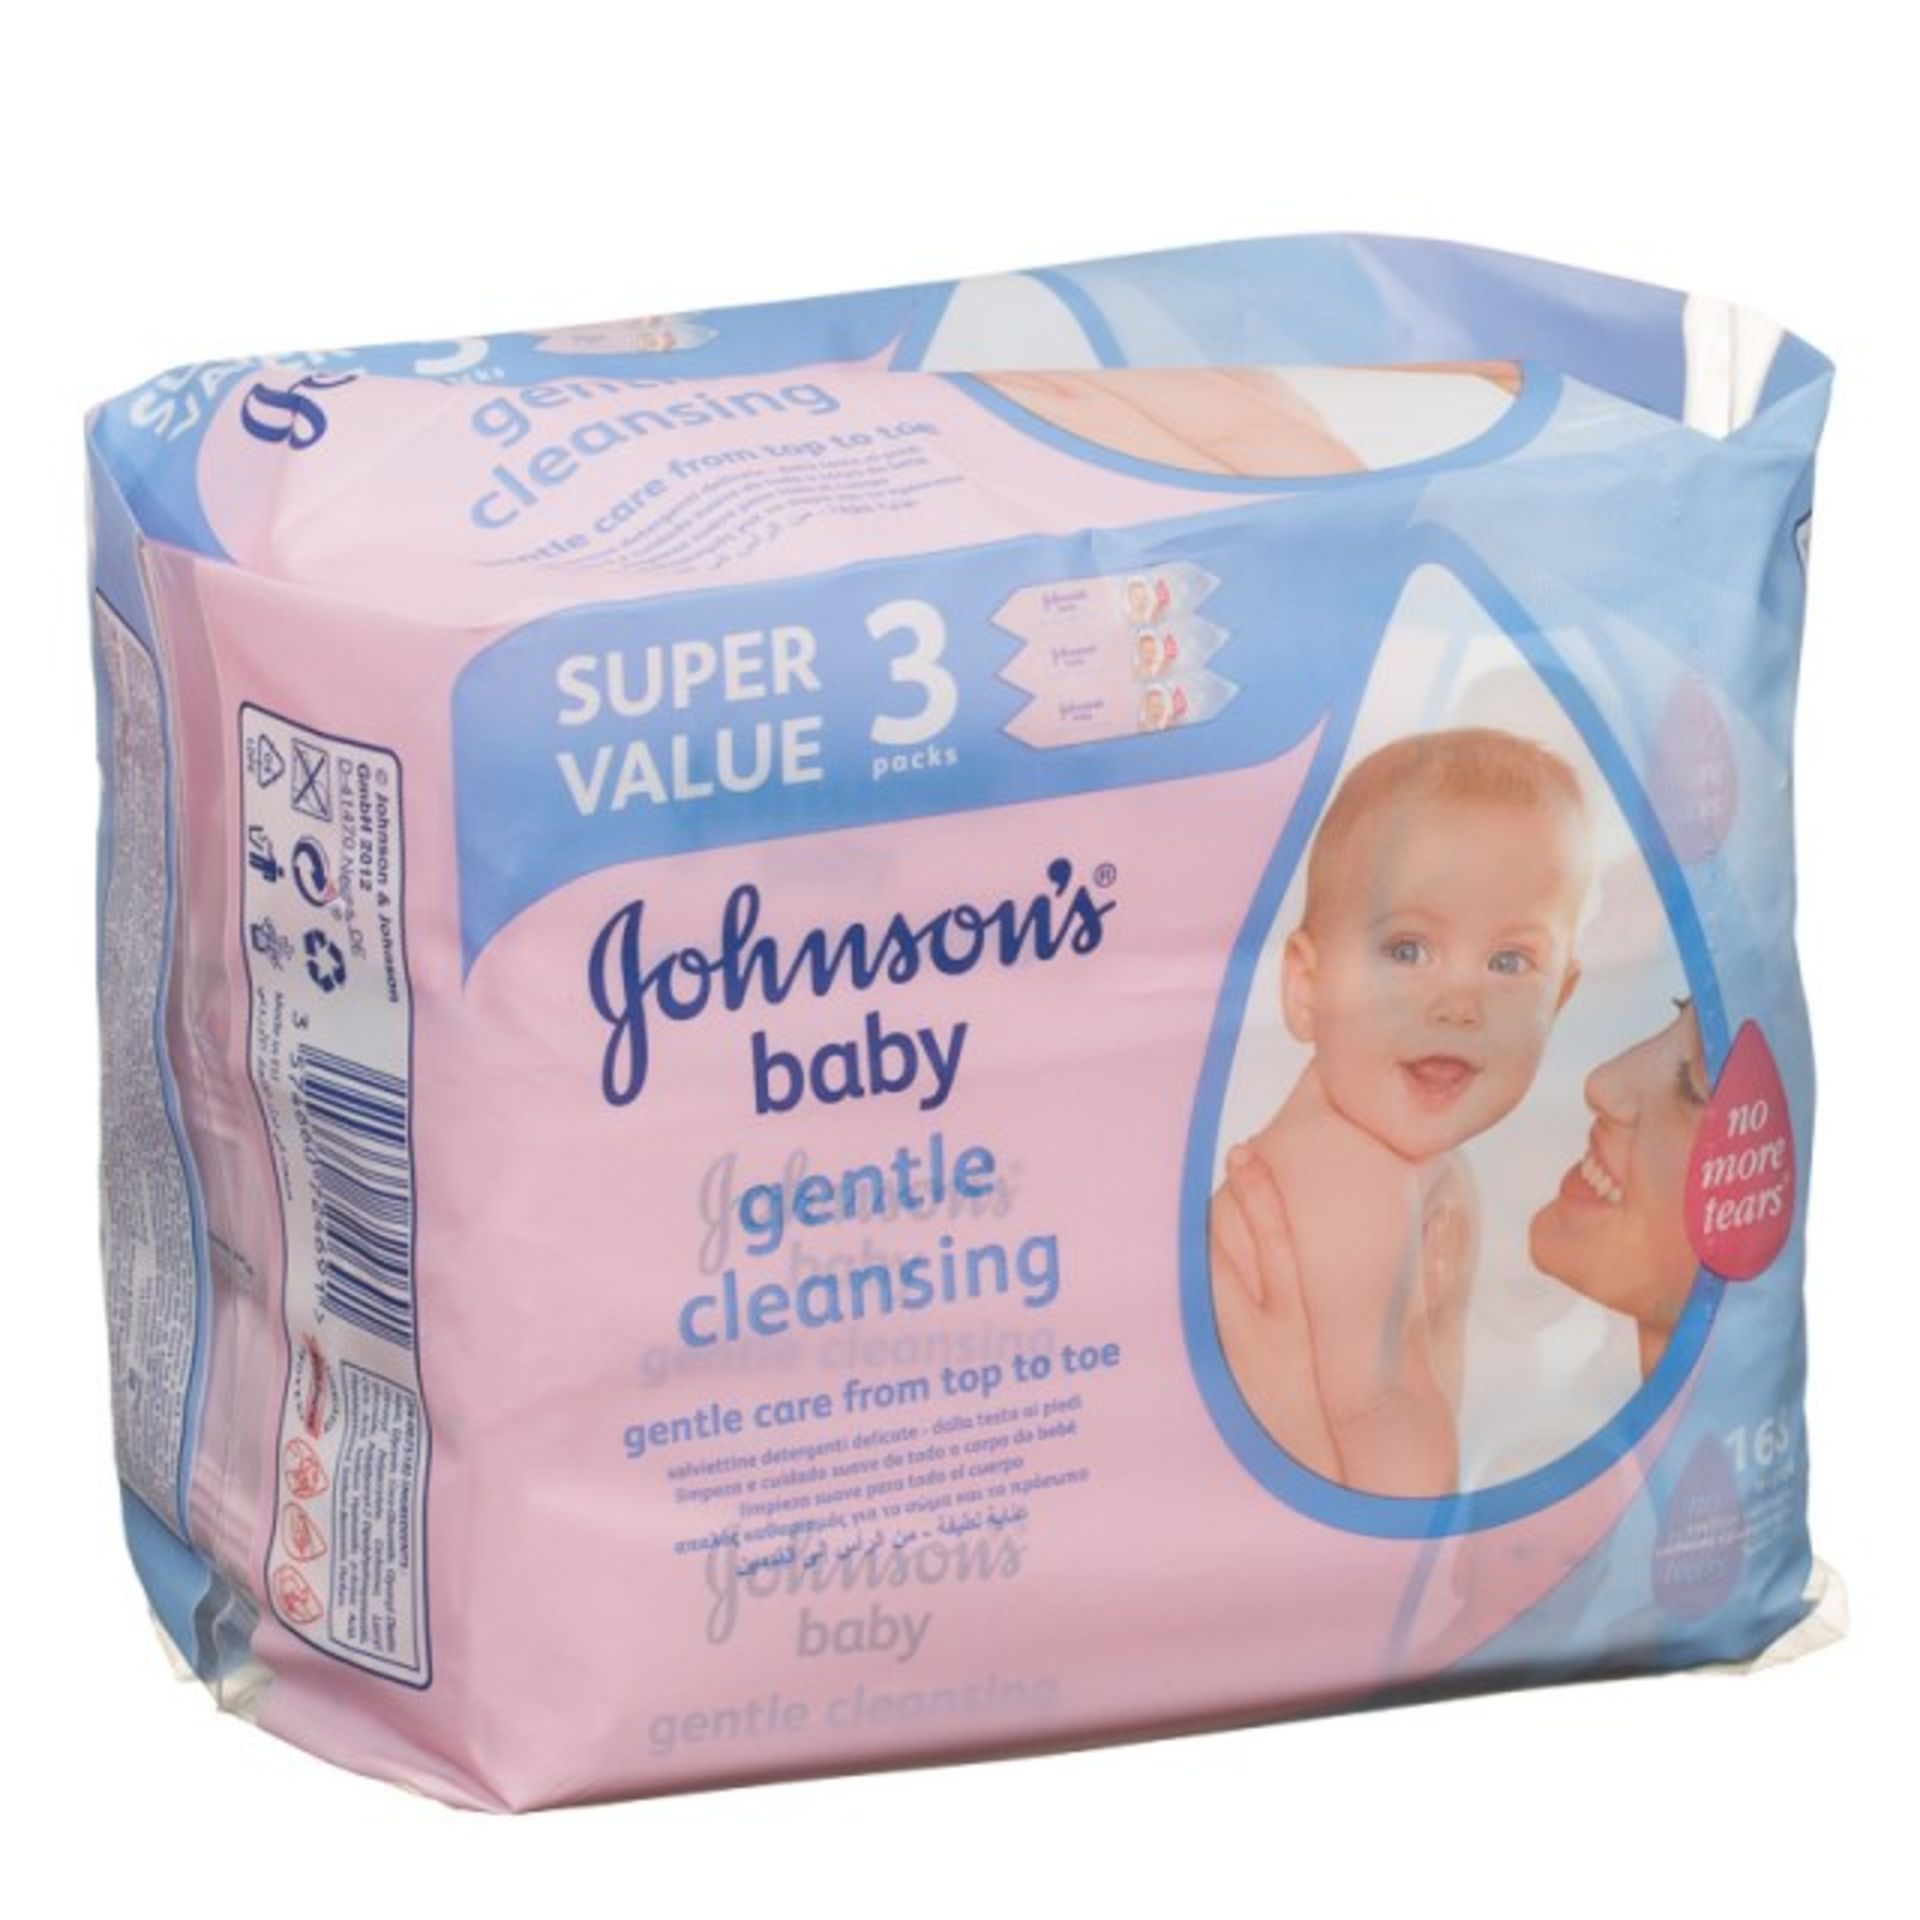 V *TRADE QTY* Brand New One Triple Pack Of 100 Johnsons Baby Gentle Cleansing Wipes RRP9.85 X 30